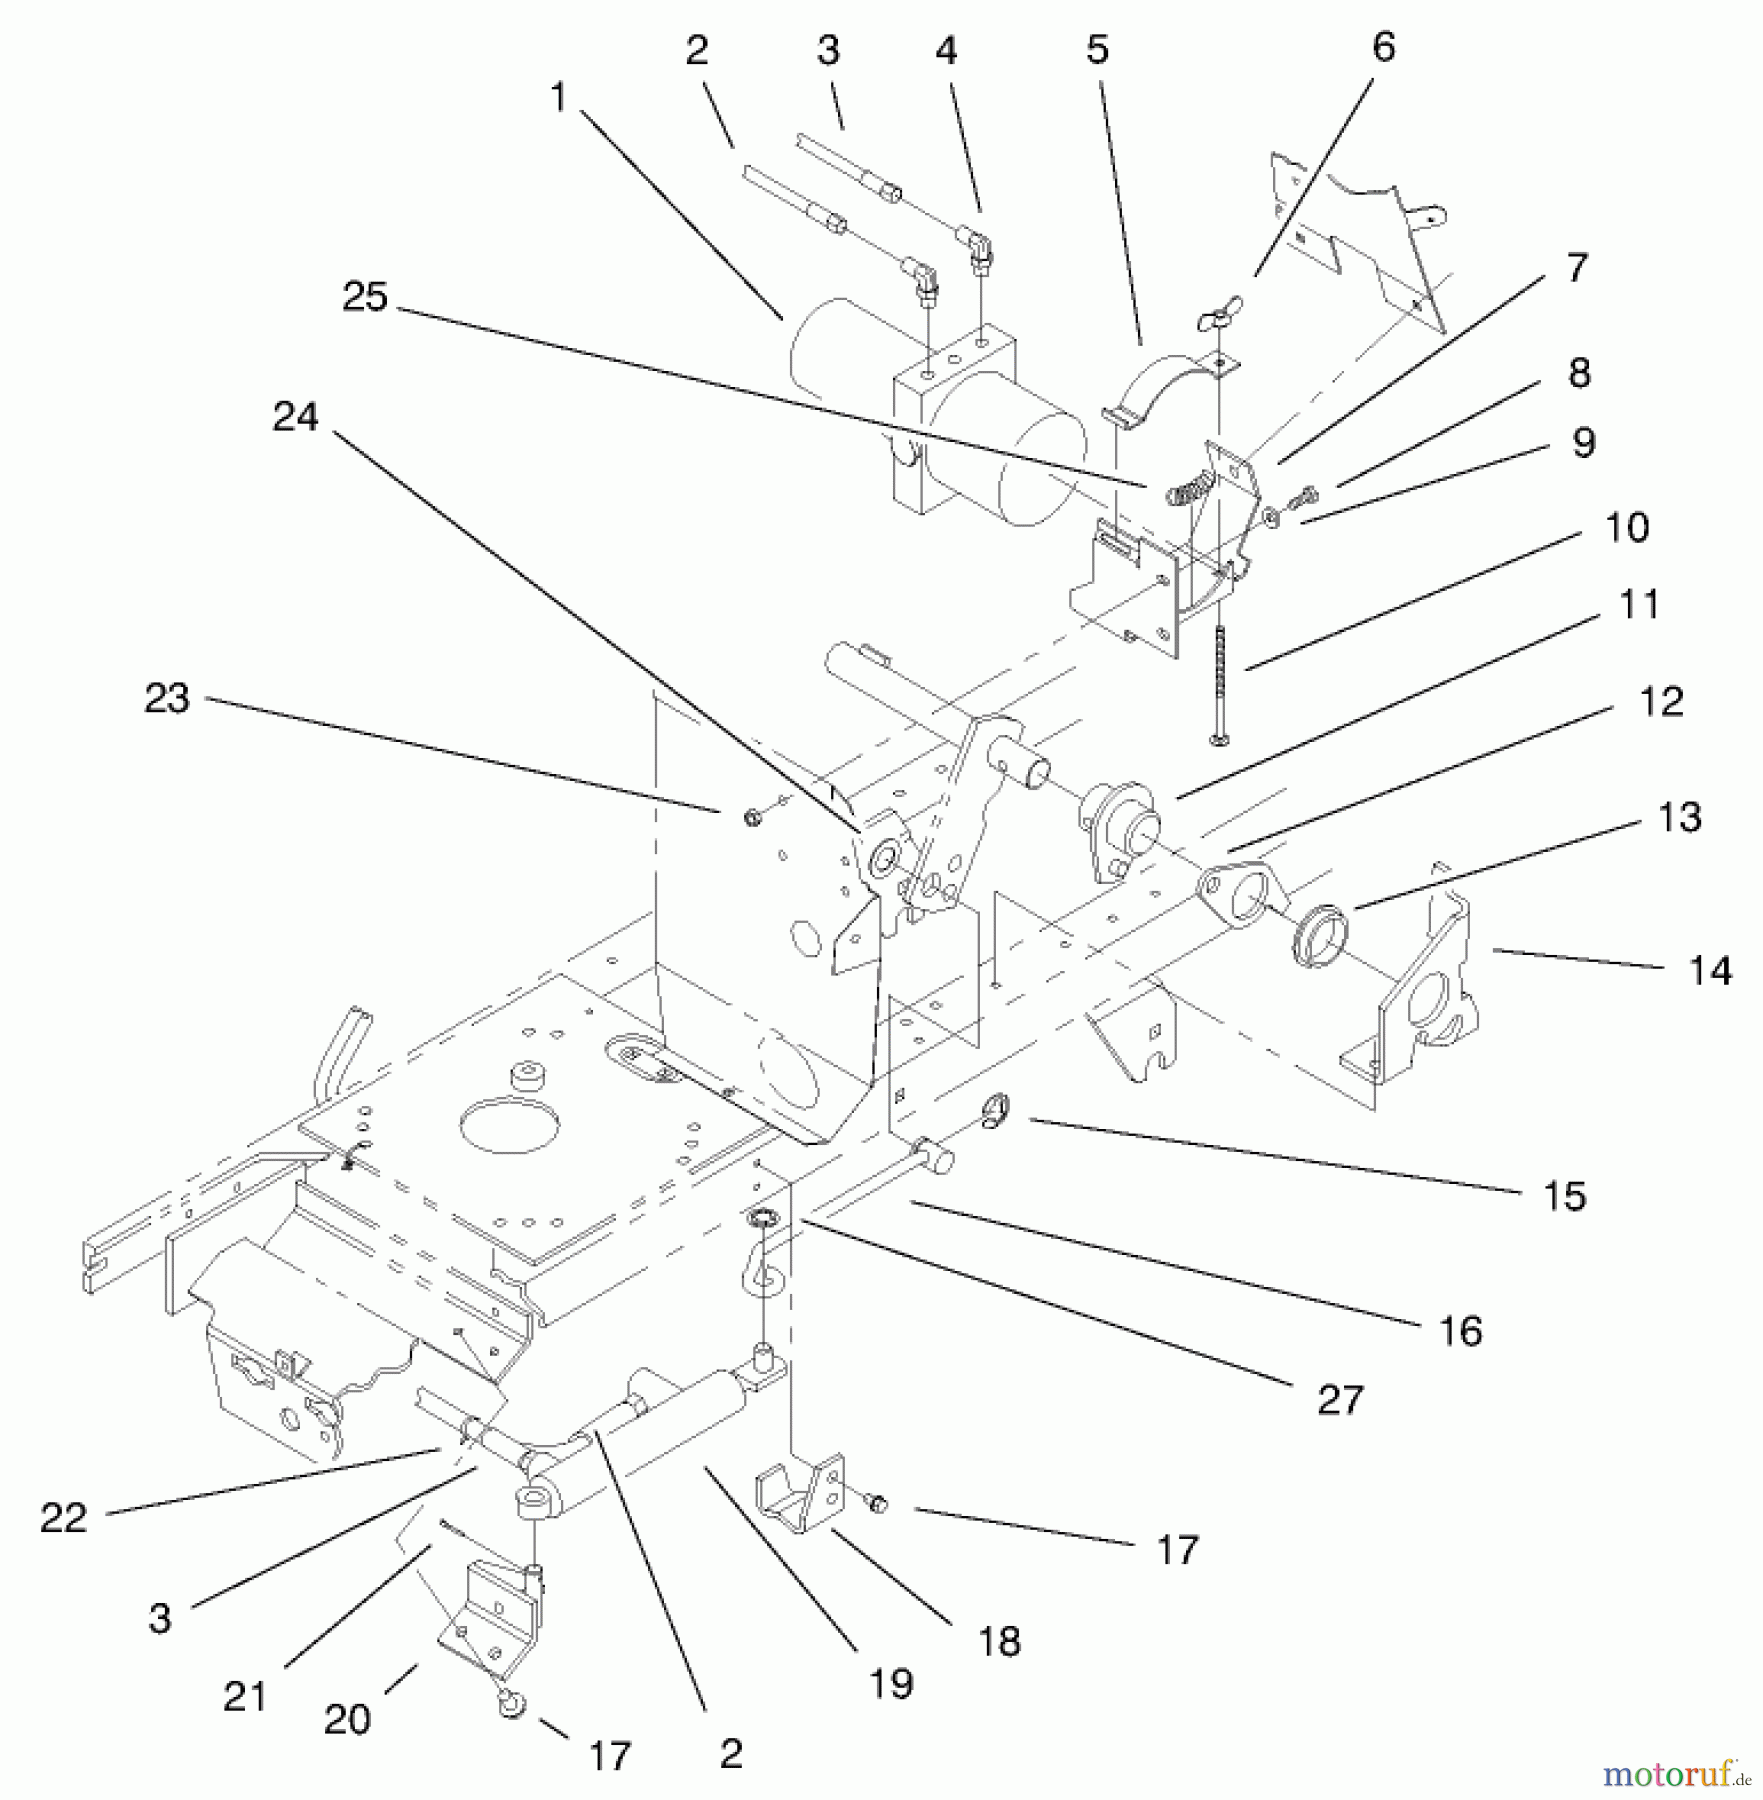  Toro Neu Mowers, Lawn & Garden Tractor Seite 1 72106 (270-H) - Toro 270-H Lawn and Garden Tractor, 1999 (9900001-9999999) POWER LIFT ASSEMBLY